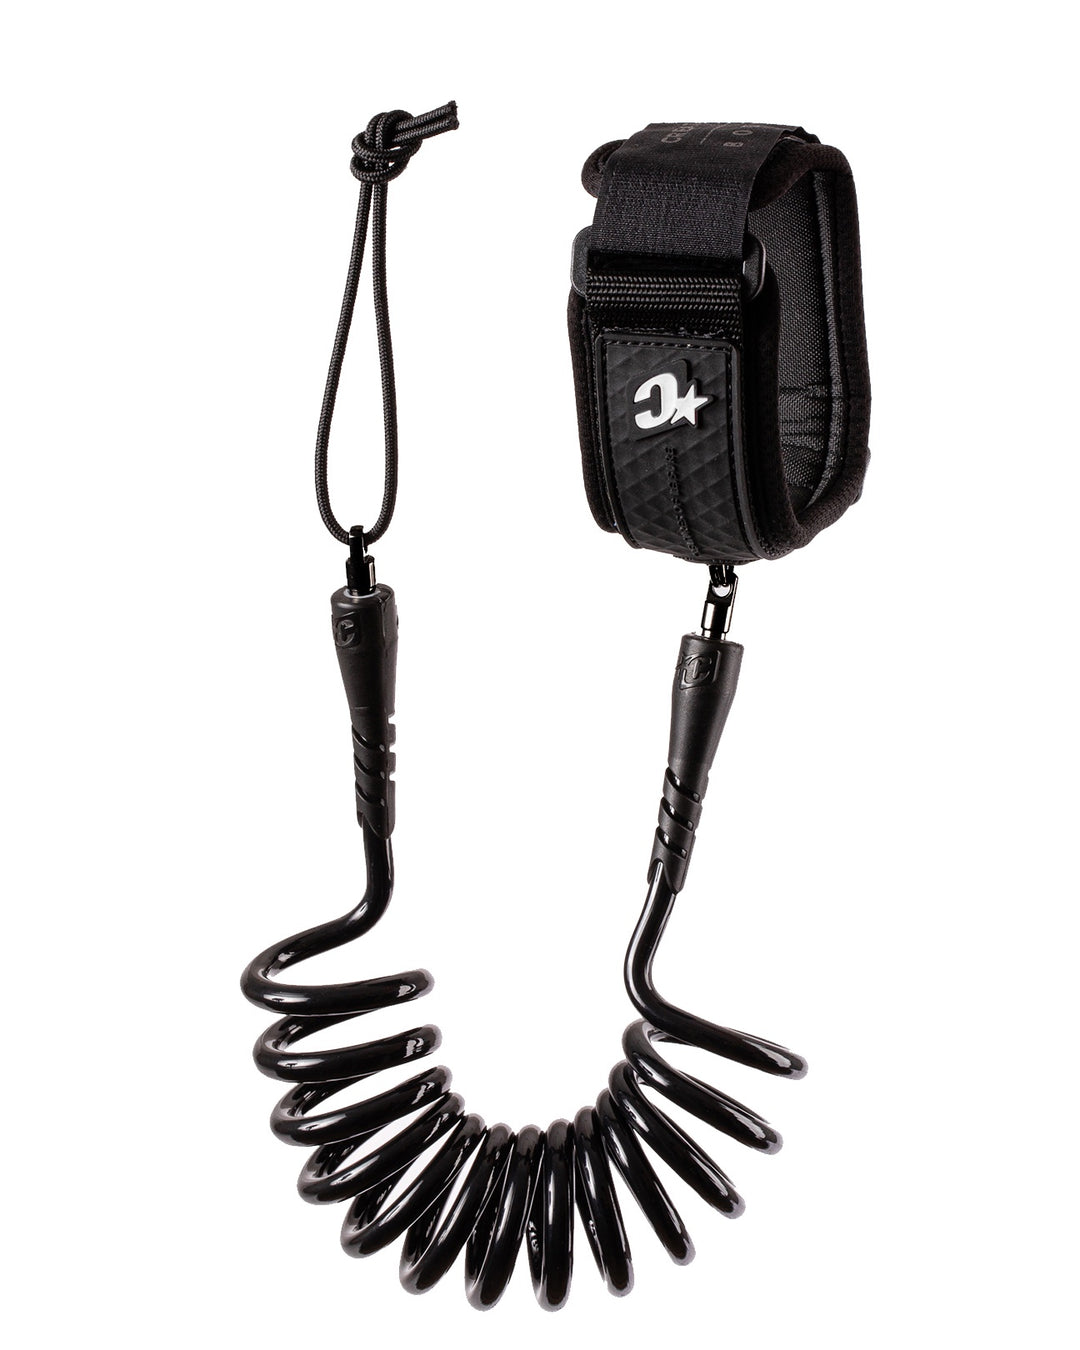 Creatures Reliance Reef Bicep Leash